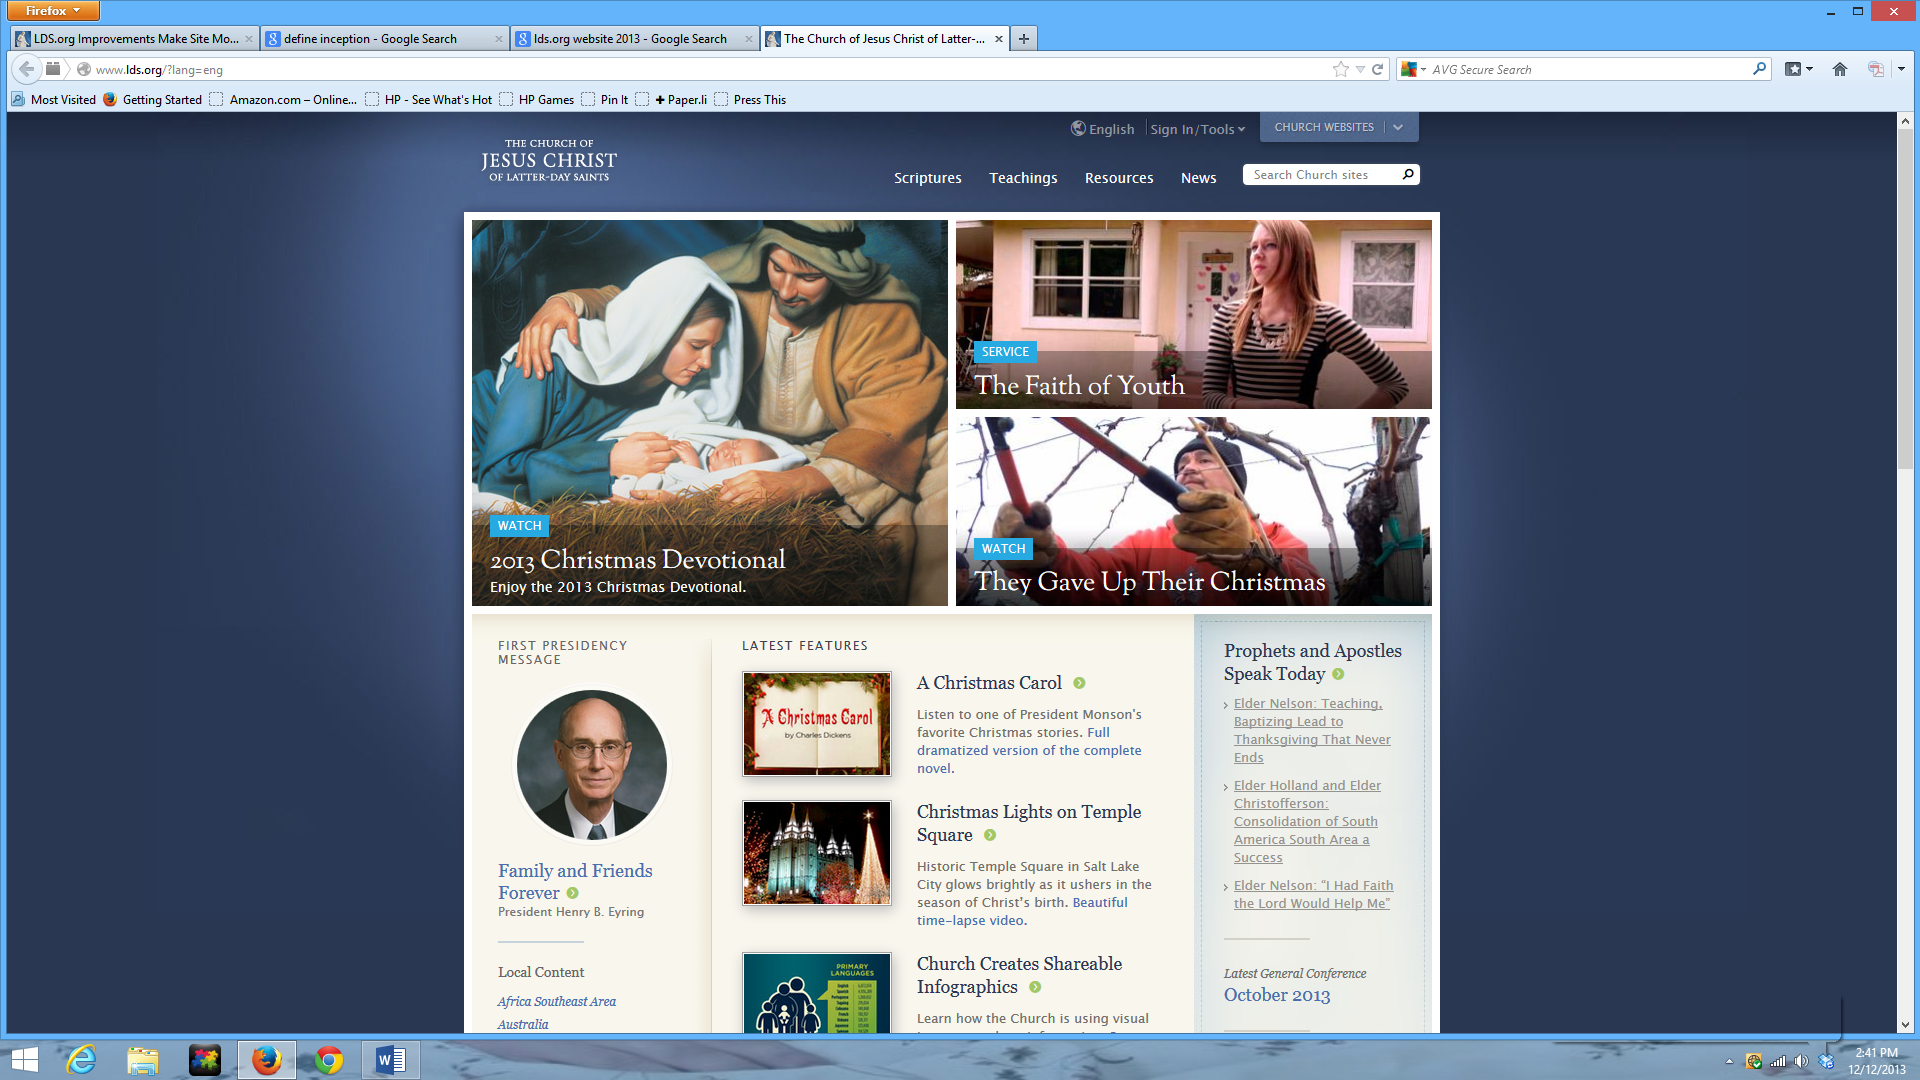 Enhancements to LDS.org Make Site More User-Friendly